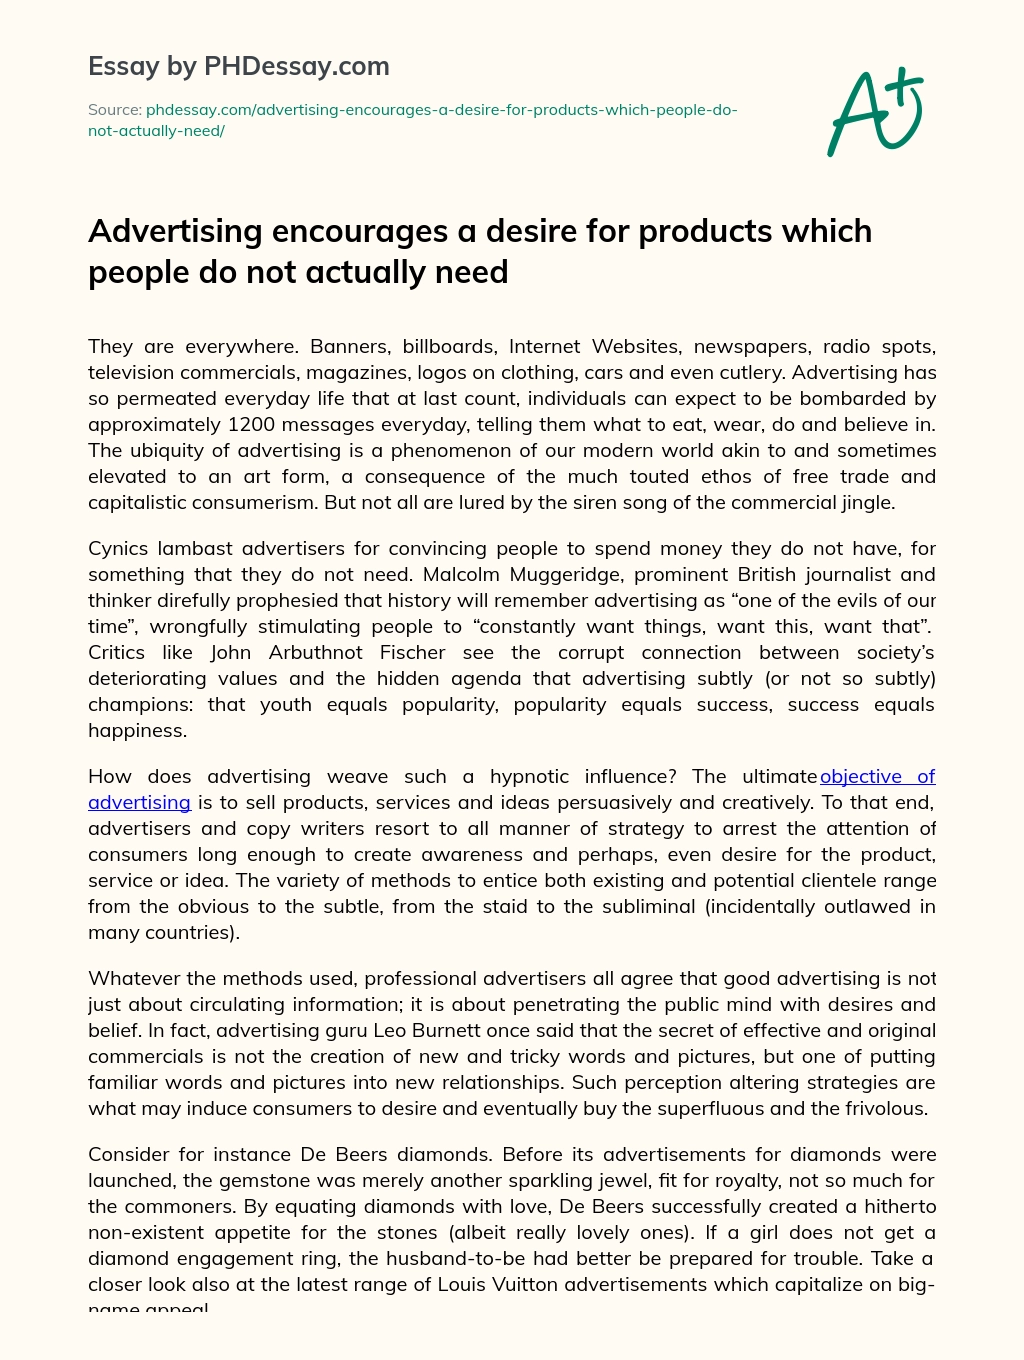 Advertising encourages a desire for products which people do not actually need essay